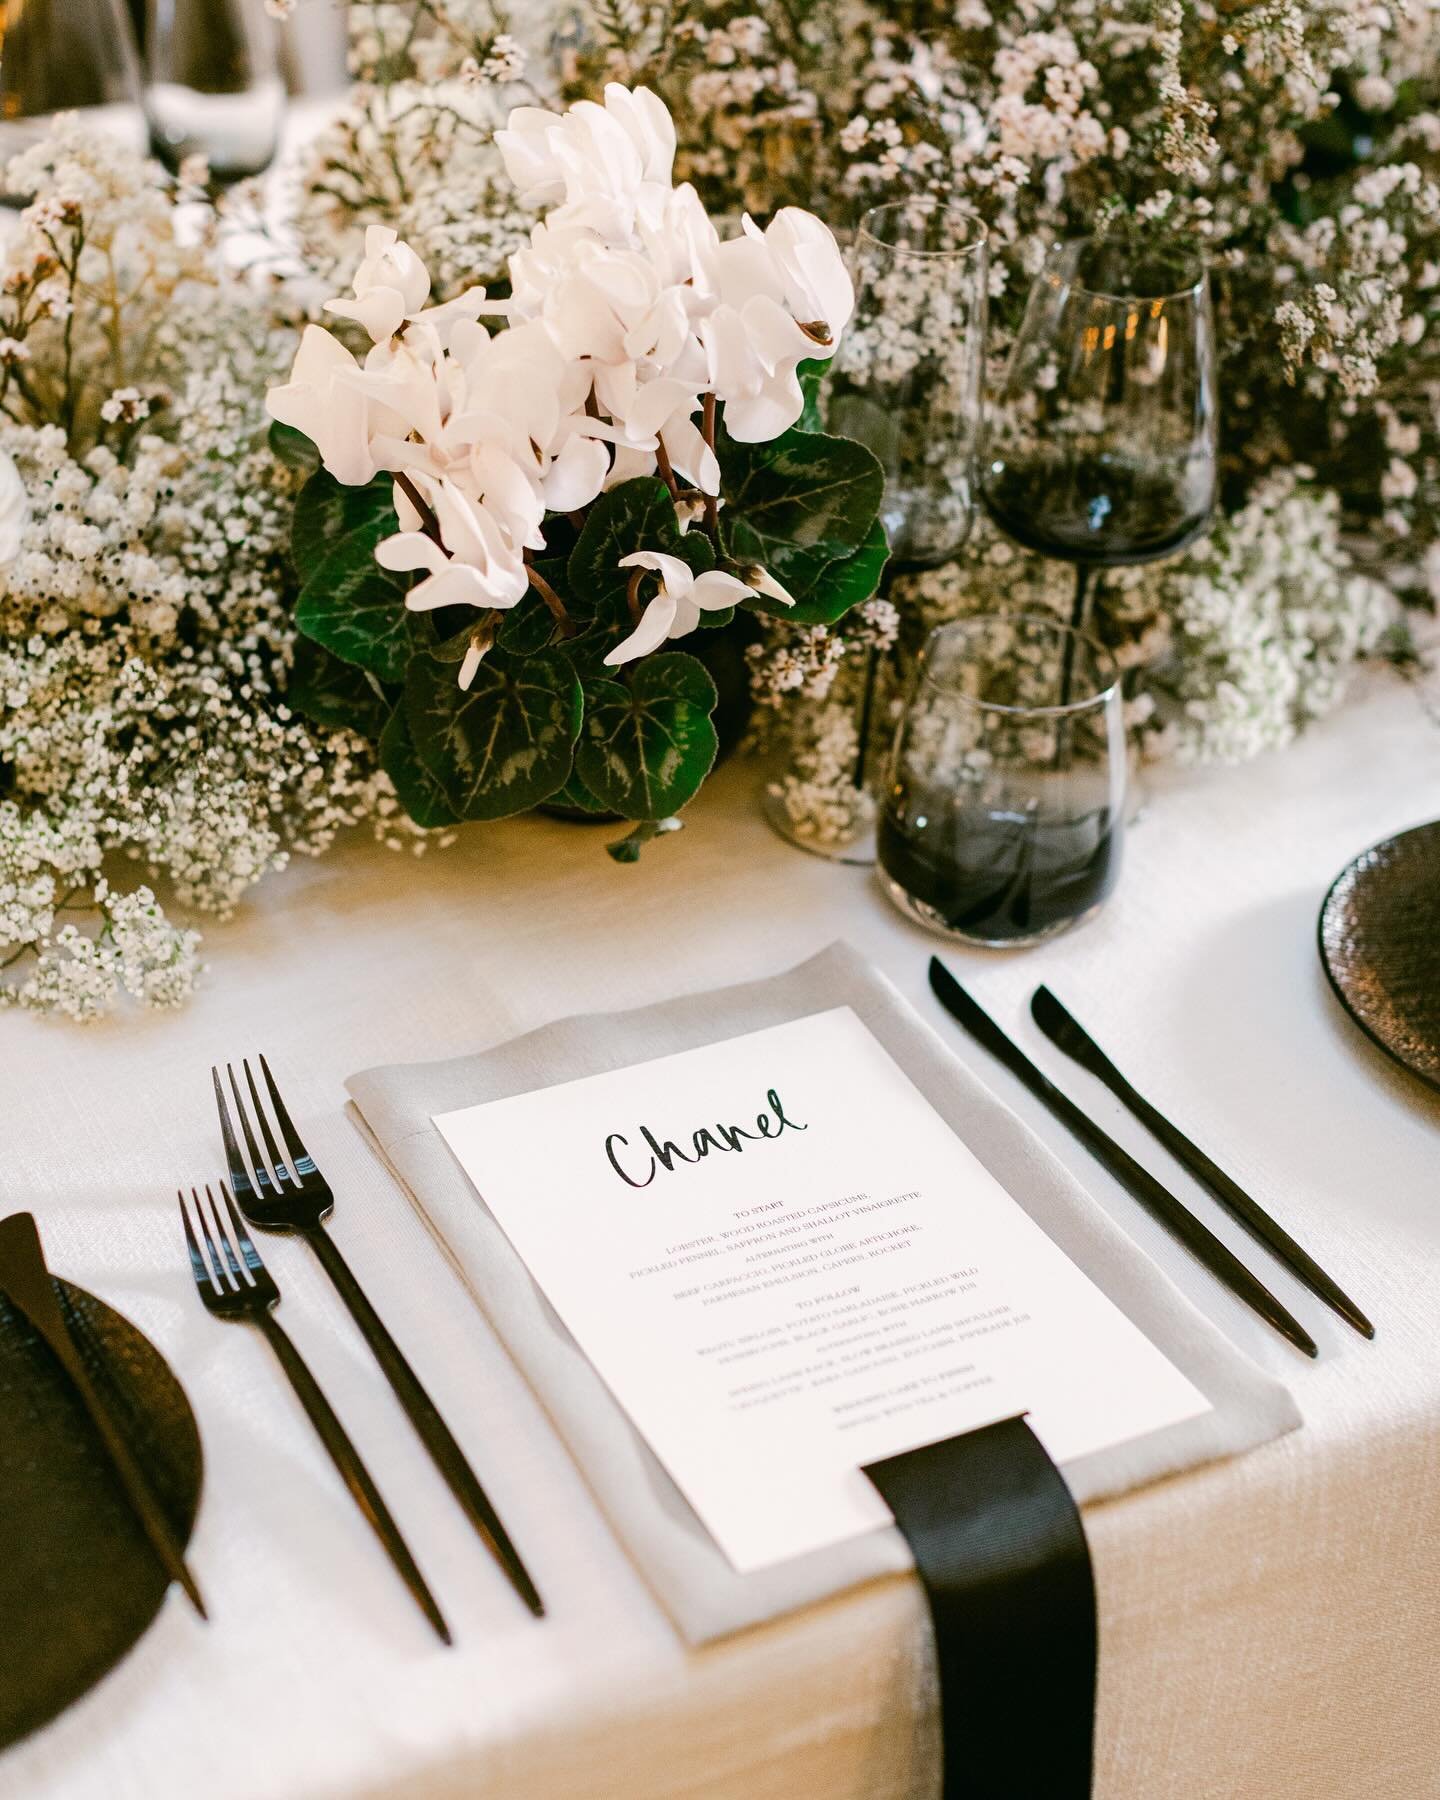 Ribbon details 🎀 

Before bows were in, ribbons were the hero of this gorgeous wedding, with each menu featuring a ribbon detail cascading over the edge of the table, in a nod to the statement ribbon seating chart. 

Such a small detail, with such a